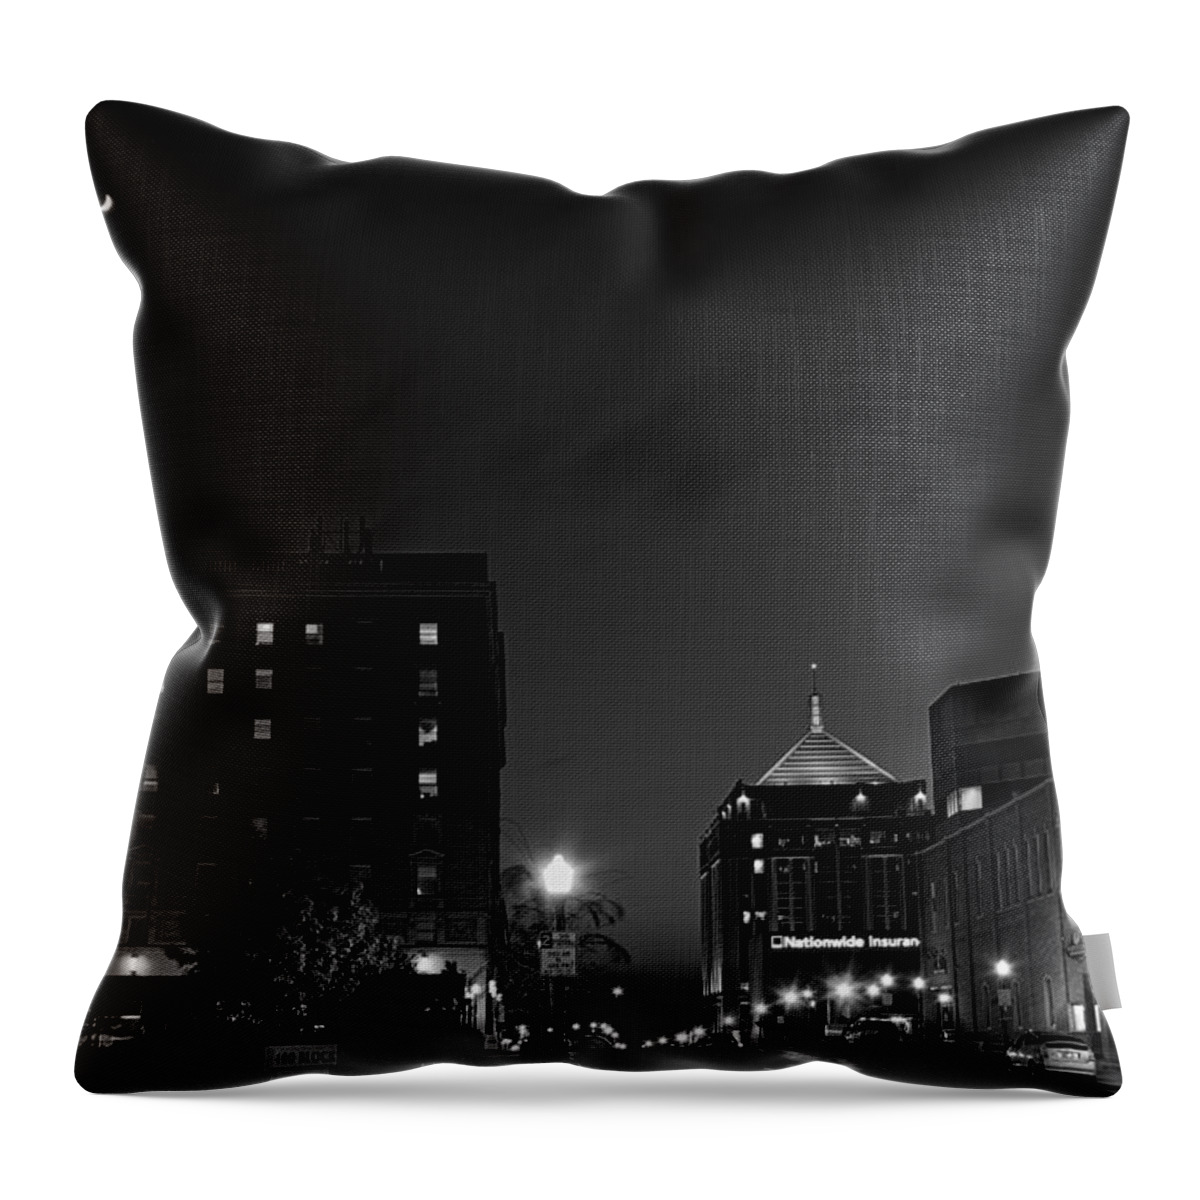 Black And White Throw Pillow featuring the photograph Wausau After Dark with the Crescent Moon Looking On by Dale Kauzlaric